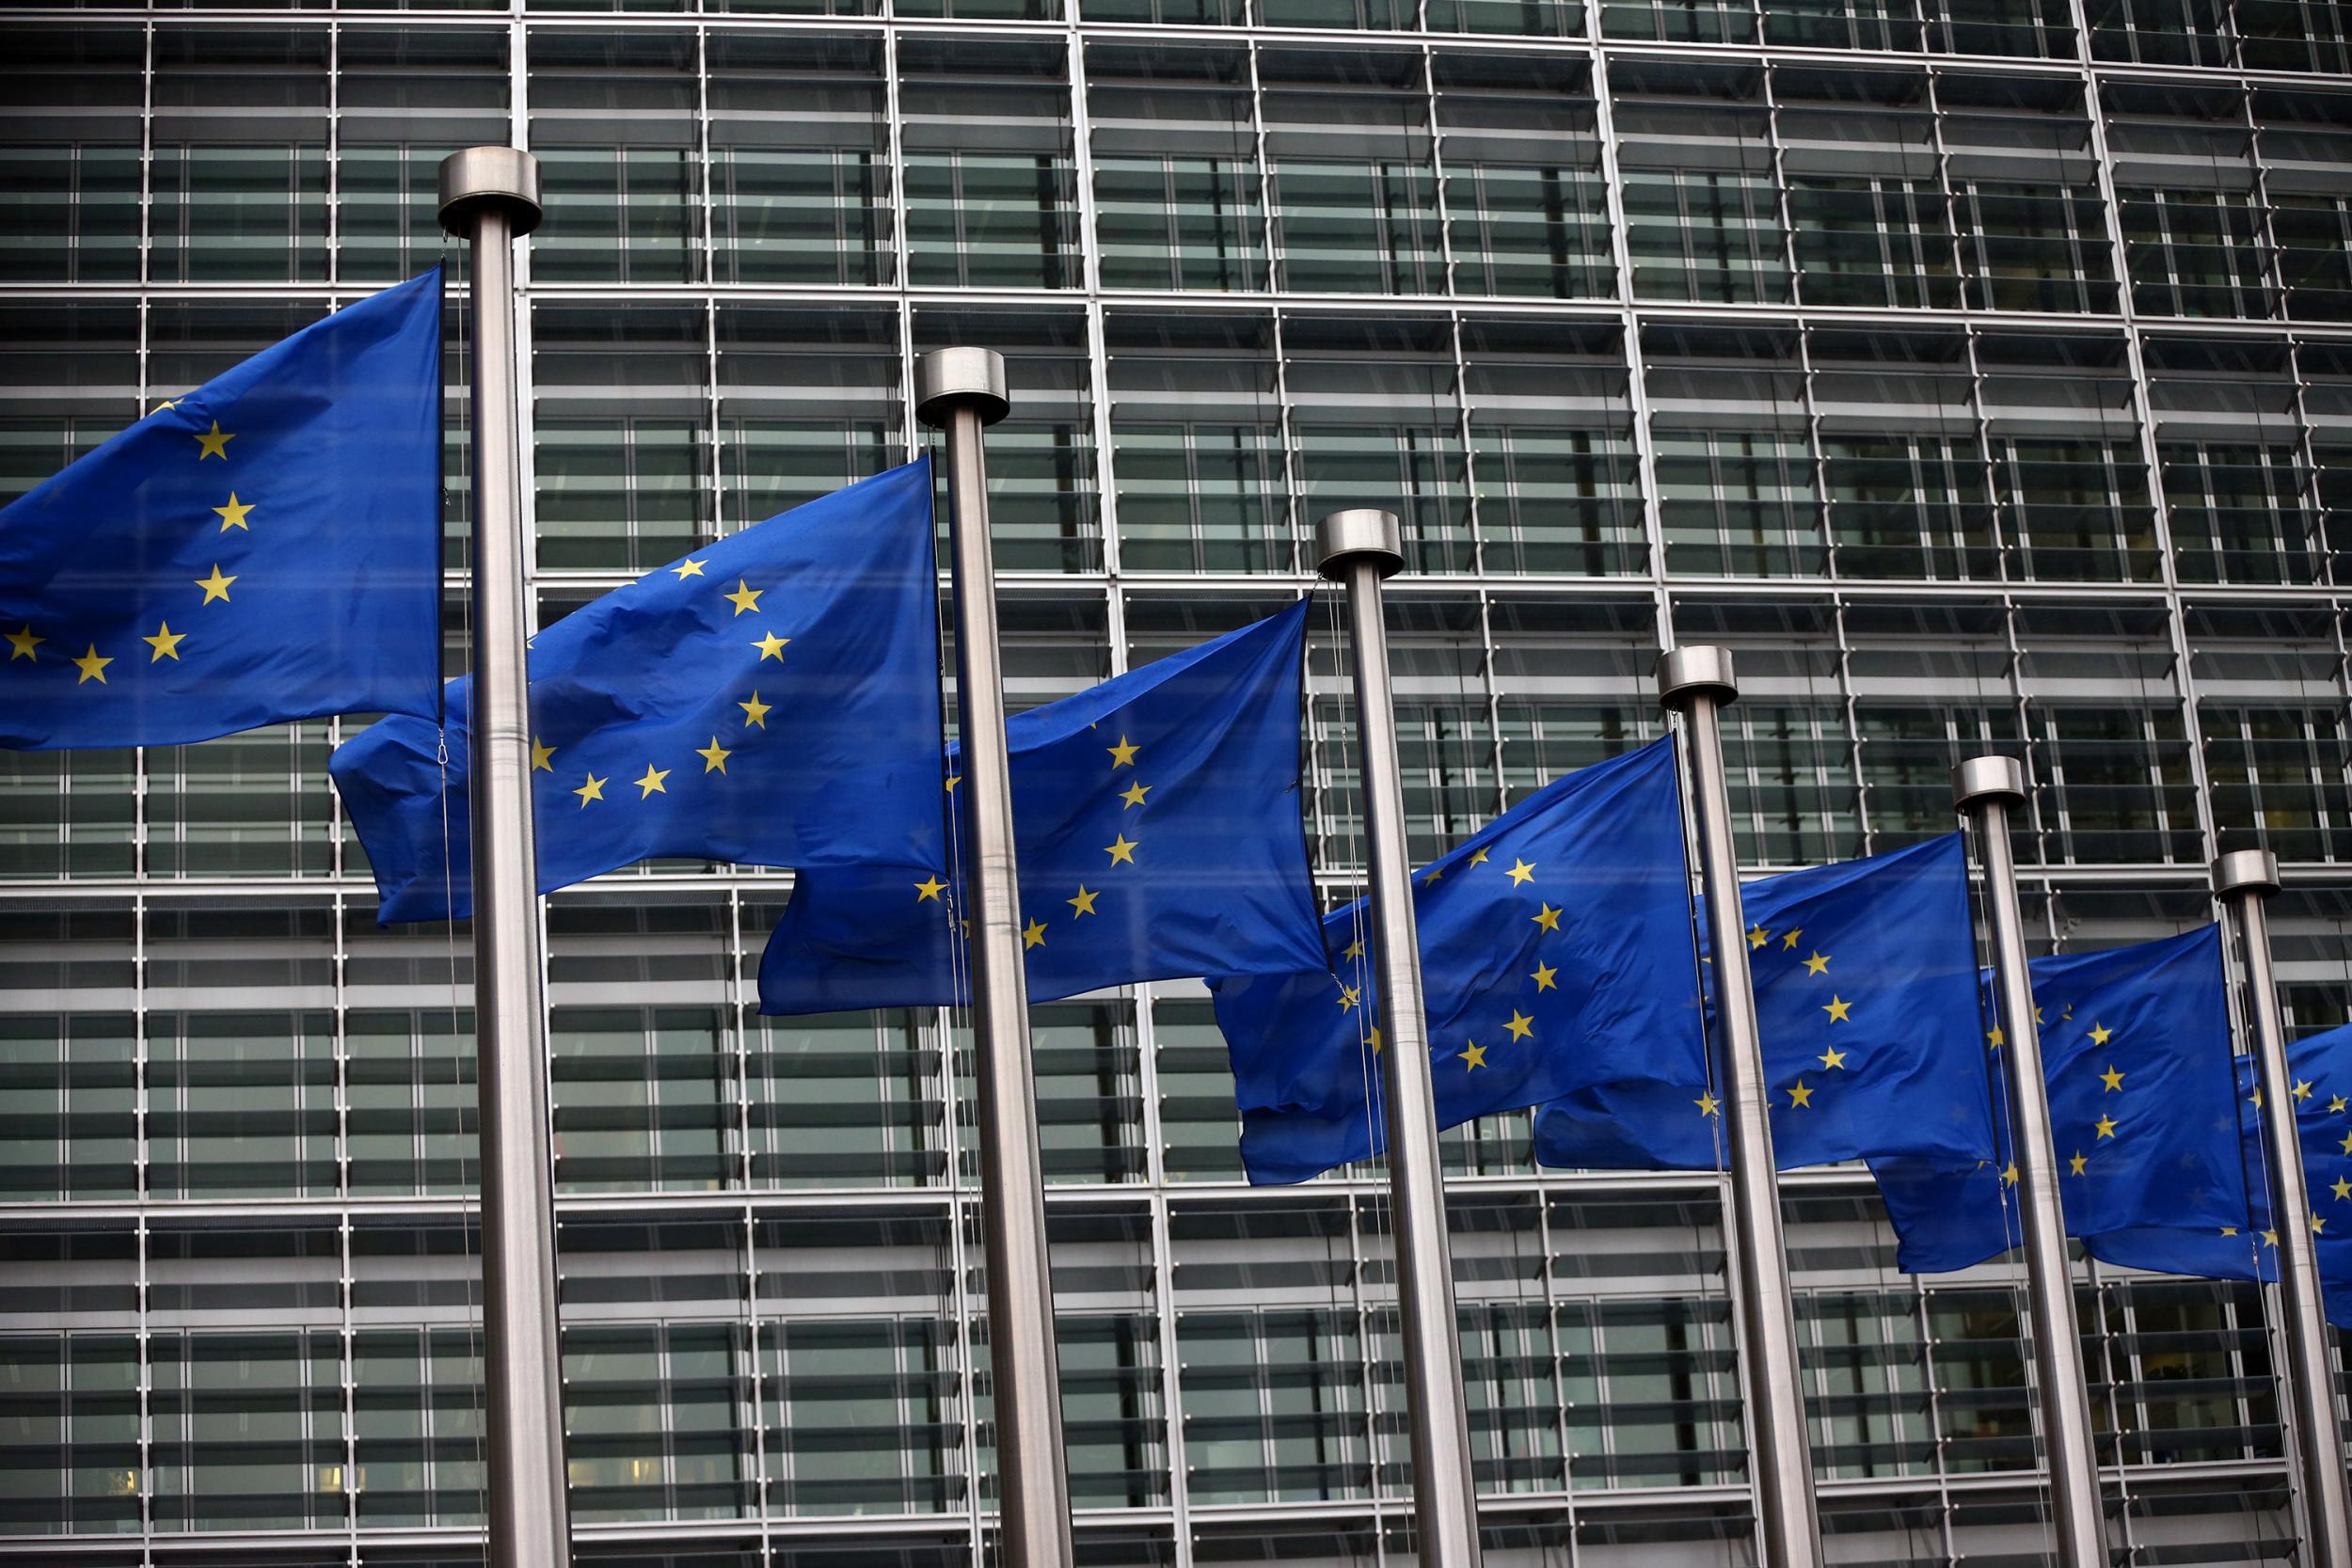 EU states and the European Parliament have three months to object to any of the new rules